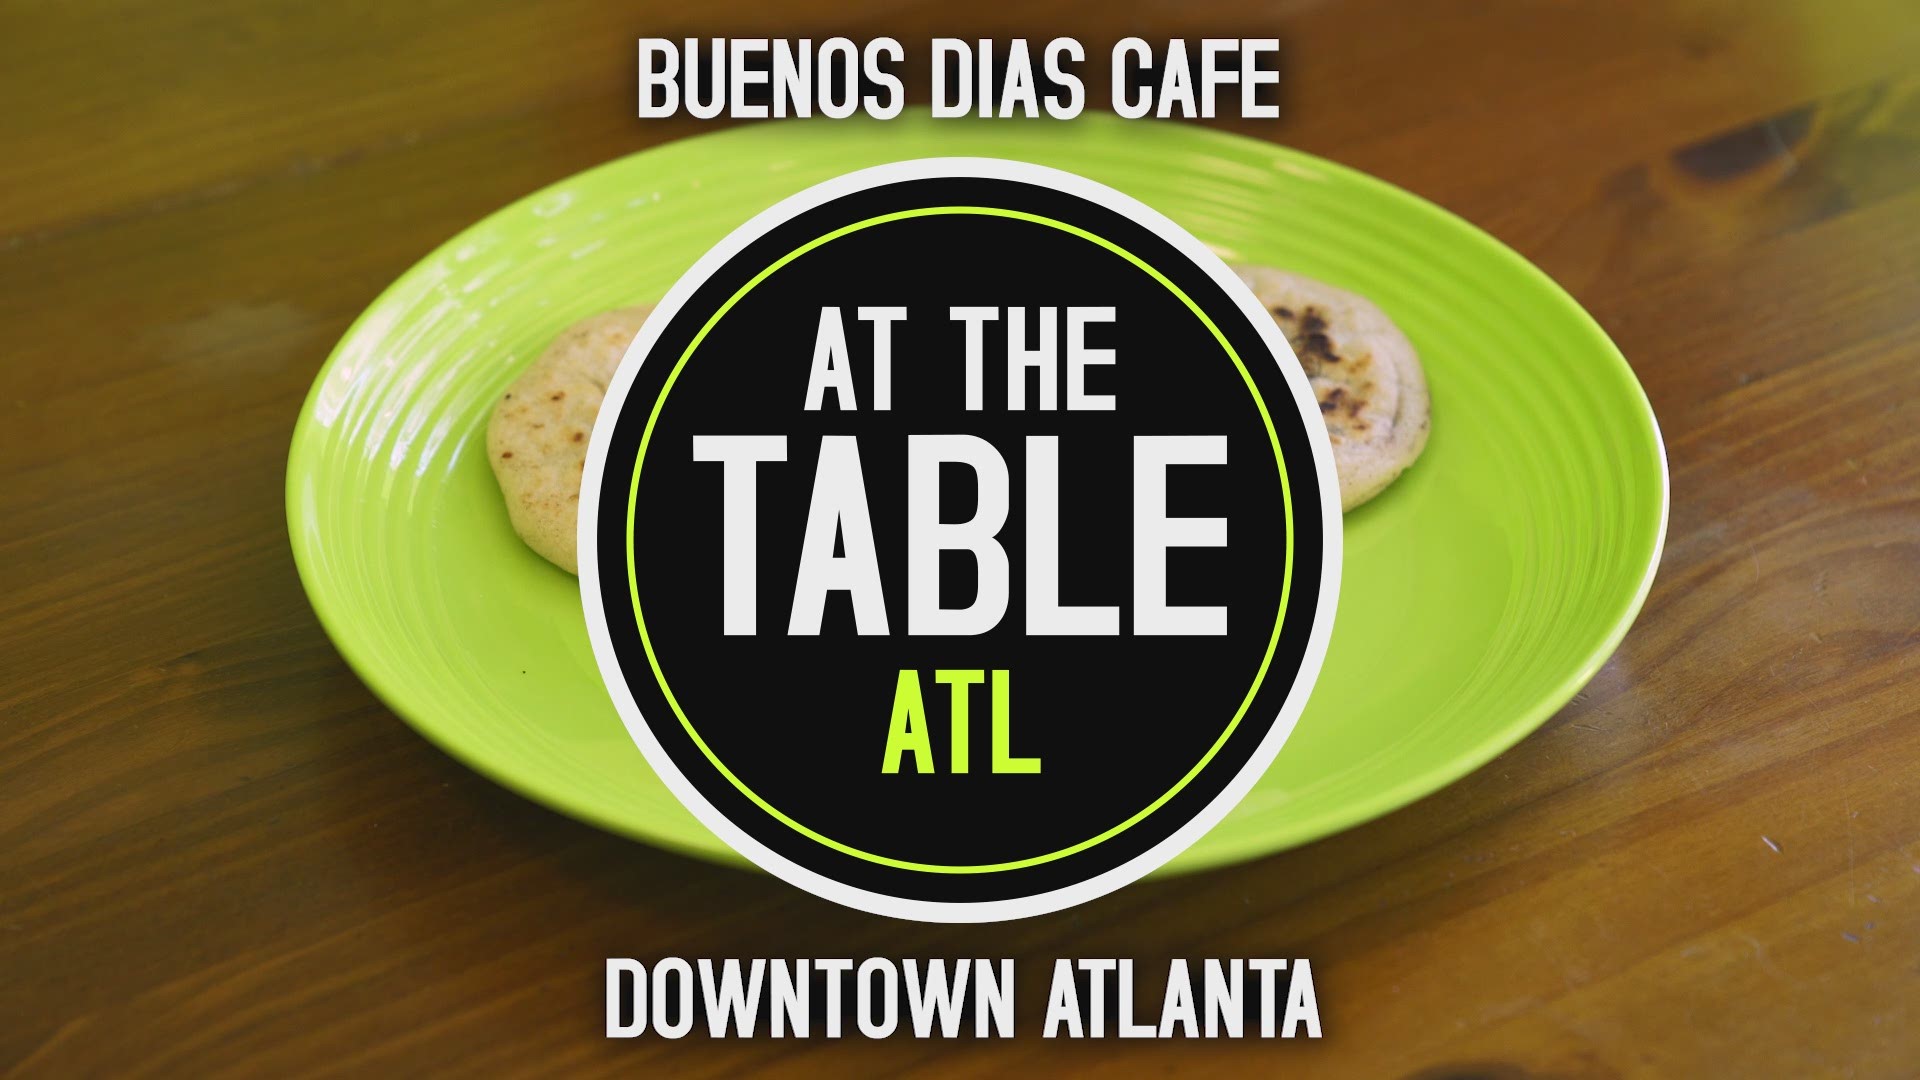 Salvadoran dishes and a focus on healthy options keep customers coming back to the downtown restaurant